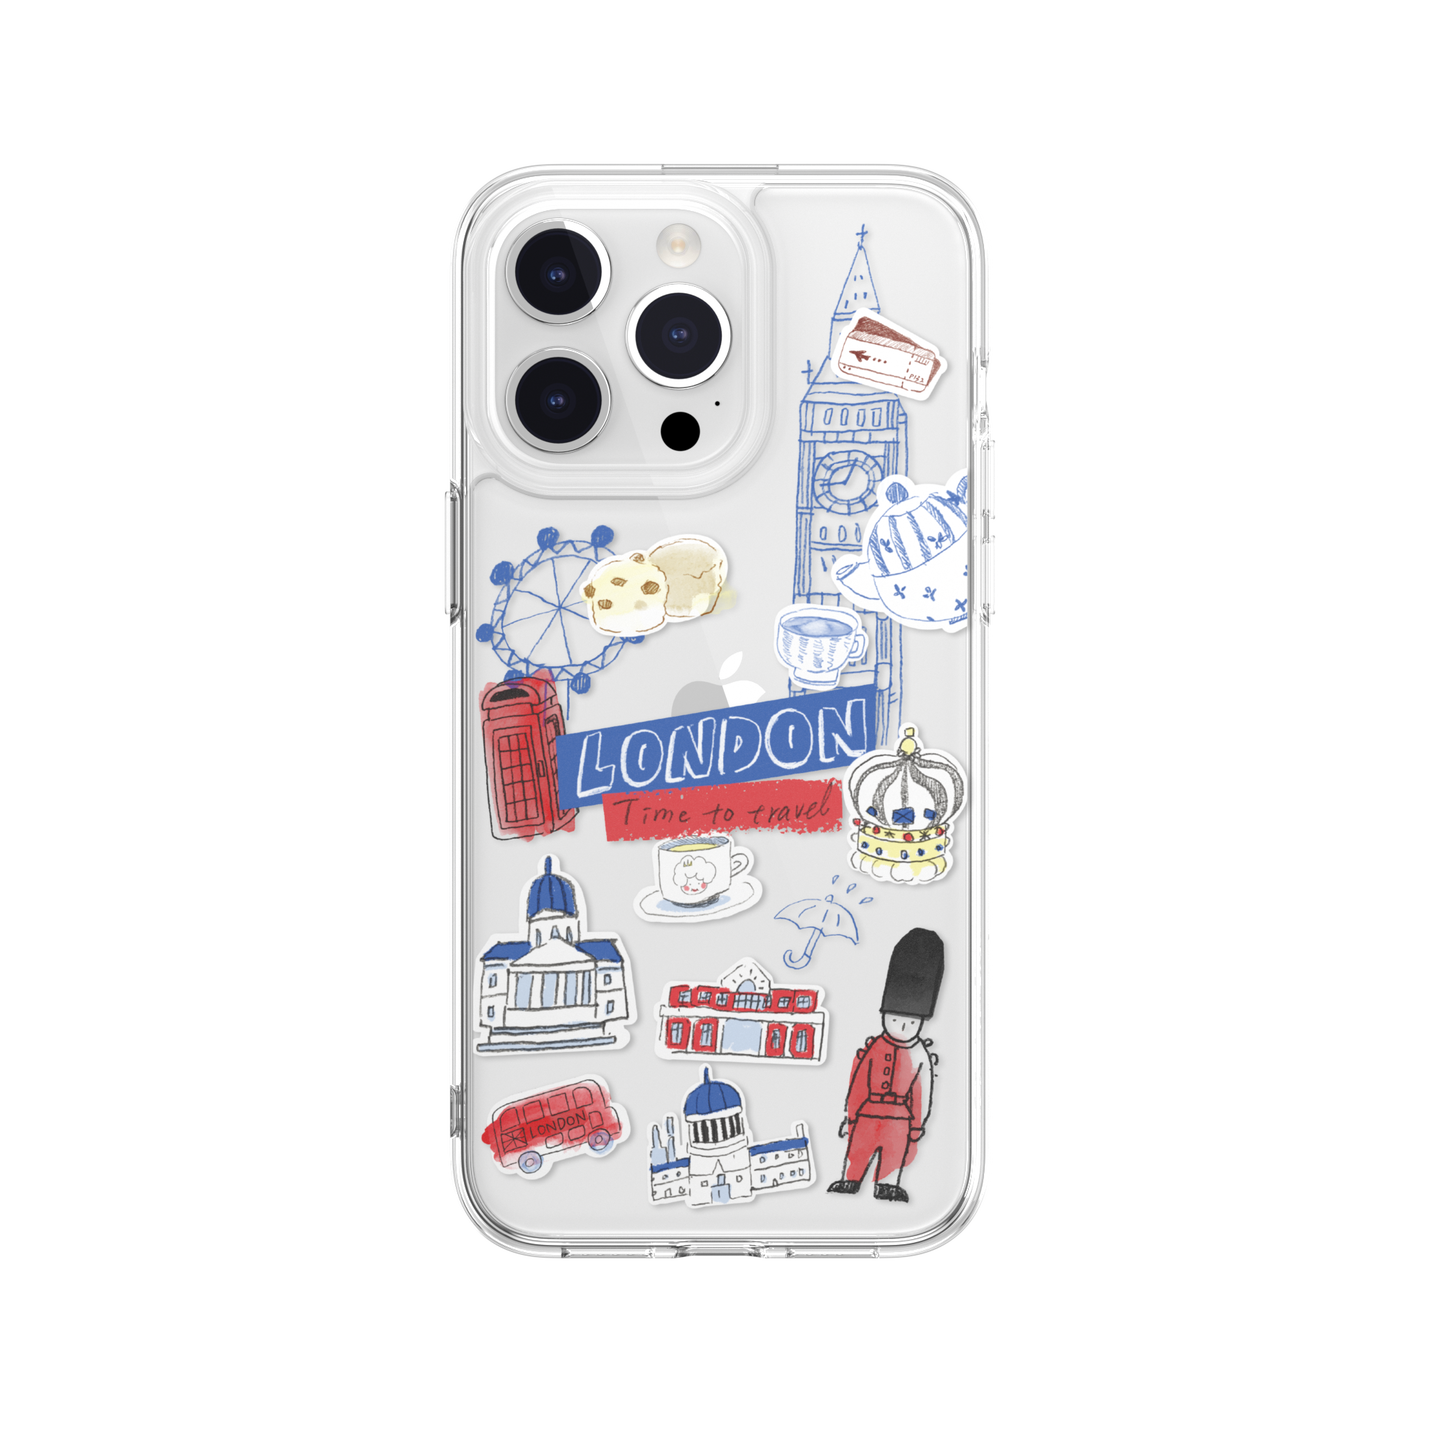 SwitchEasy City Hand-drawn Print AirBarrier Shockproof Clear Case Cover